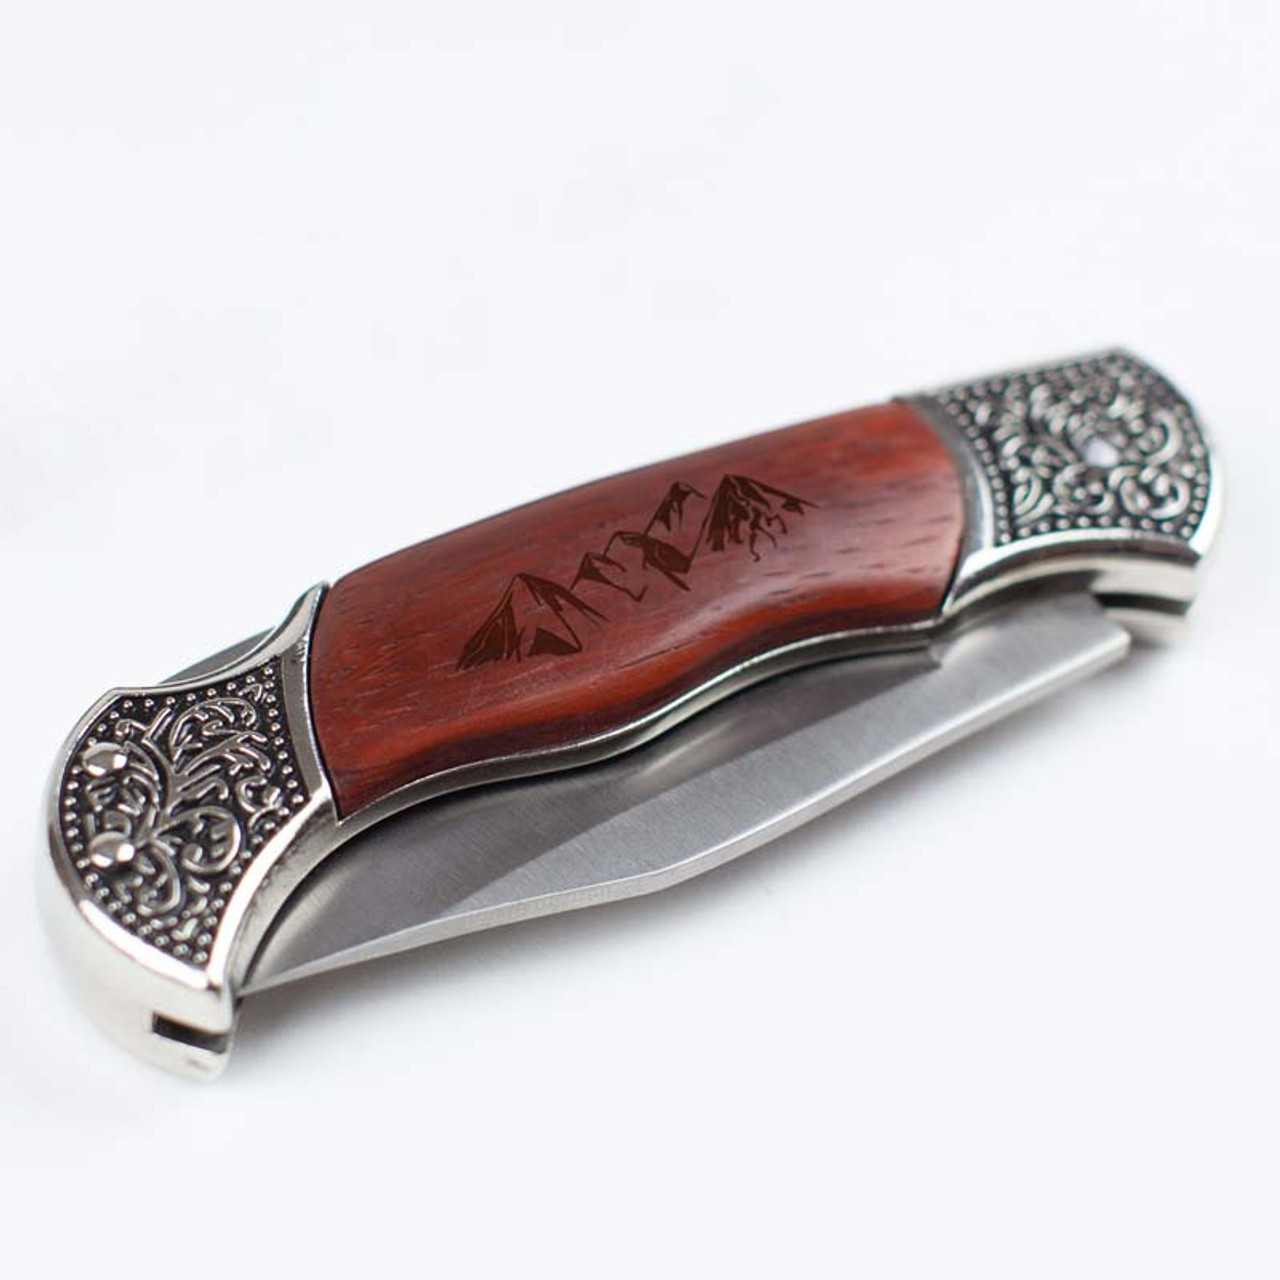 https://cdn11.bigcommerce.com/s-d22a0/images/stencil/1280x1280/products/2540/12077/mountain-pocket-knife-hiking-gifts__80543.1626095061.jpg?c=2